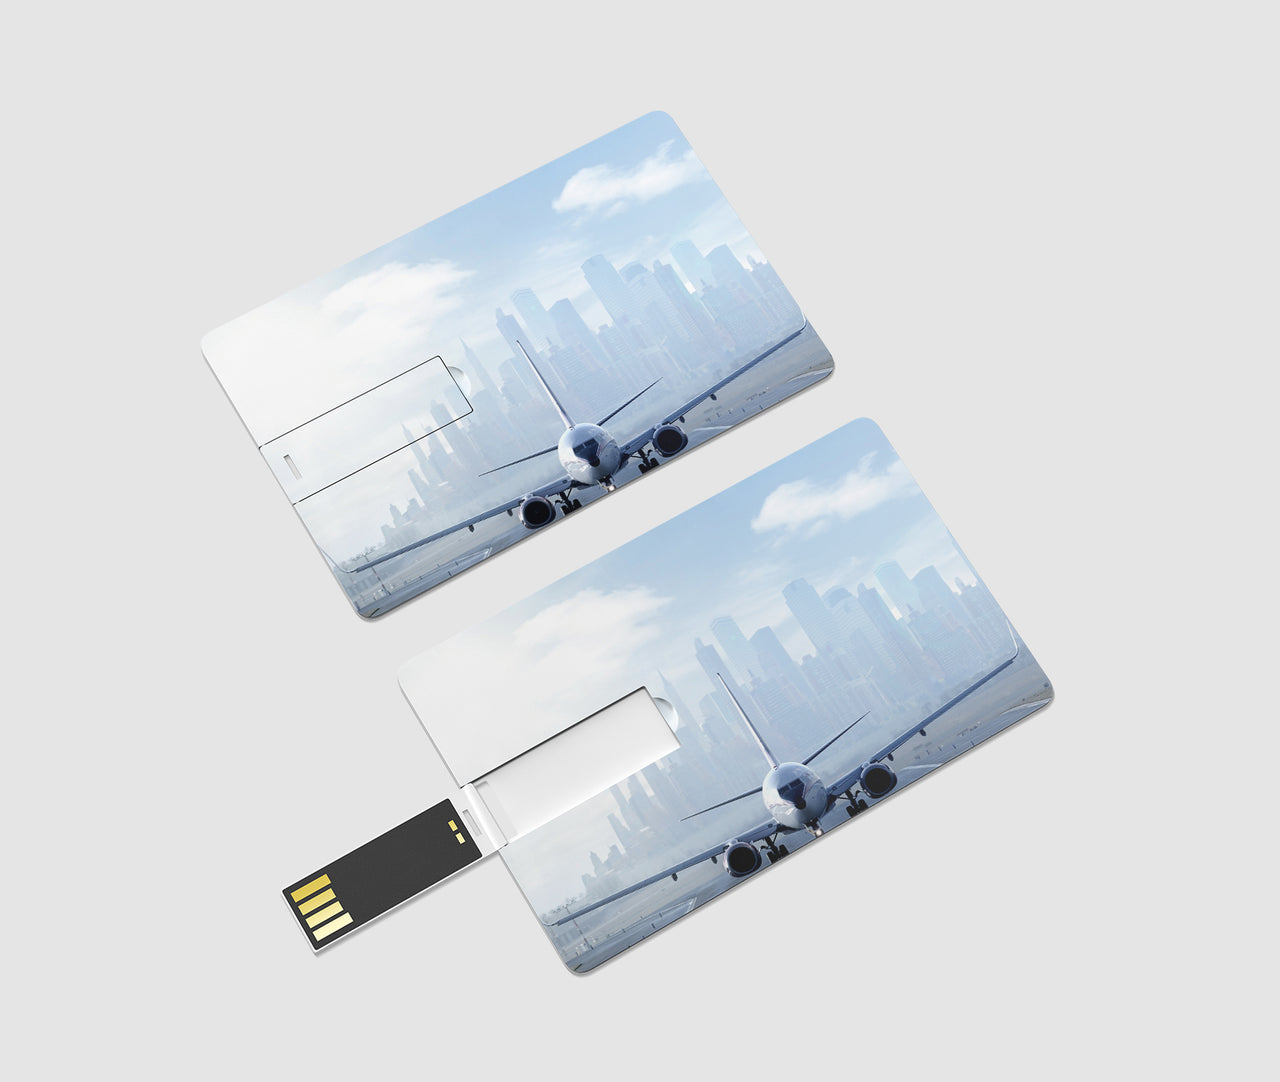 Boeing 737 & City View Behind Designed USB Cards